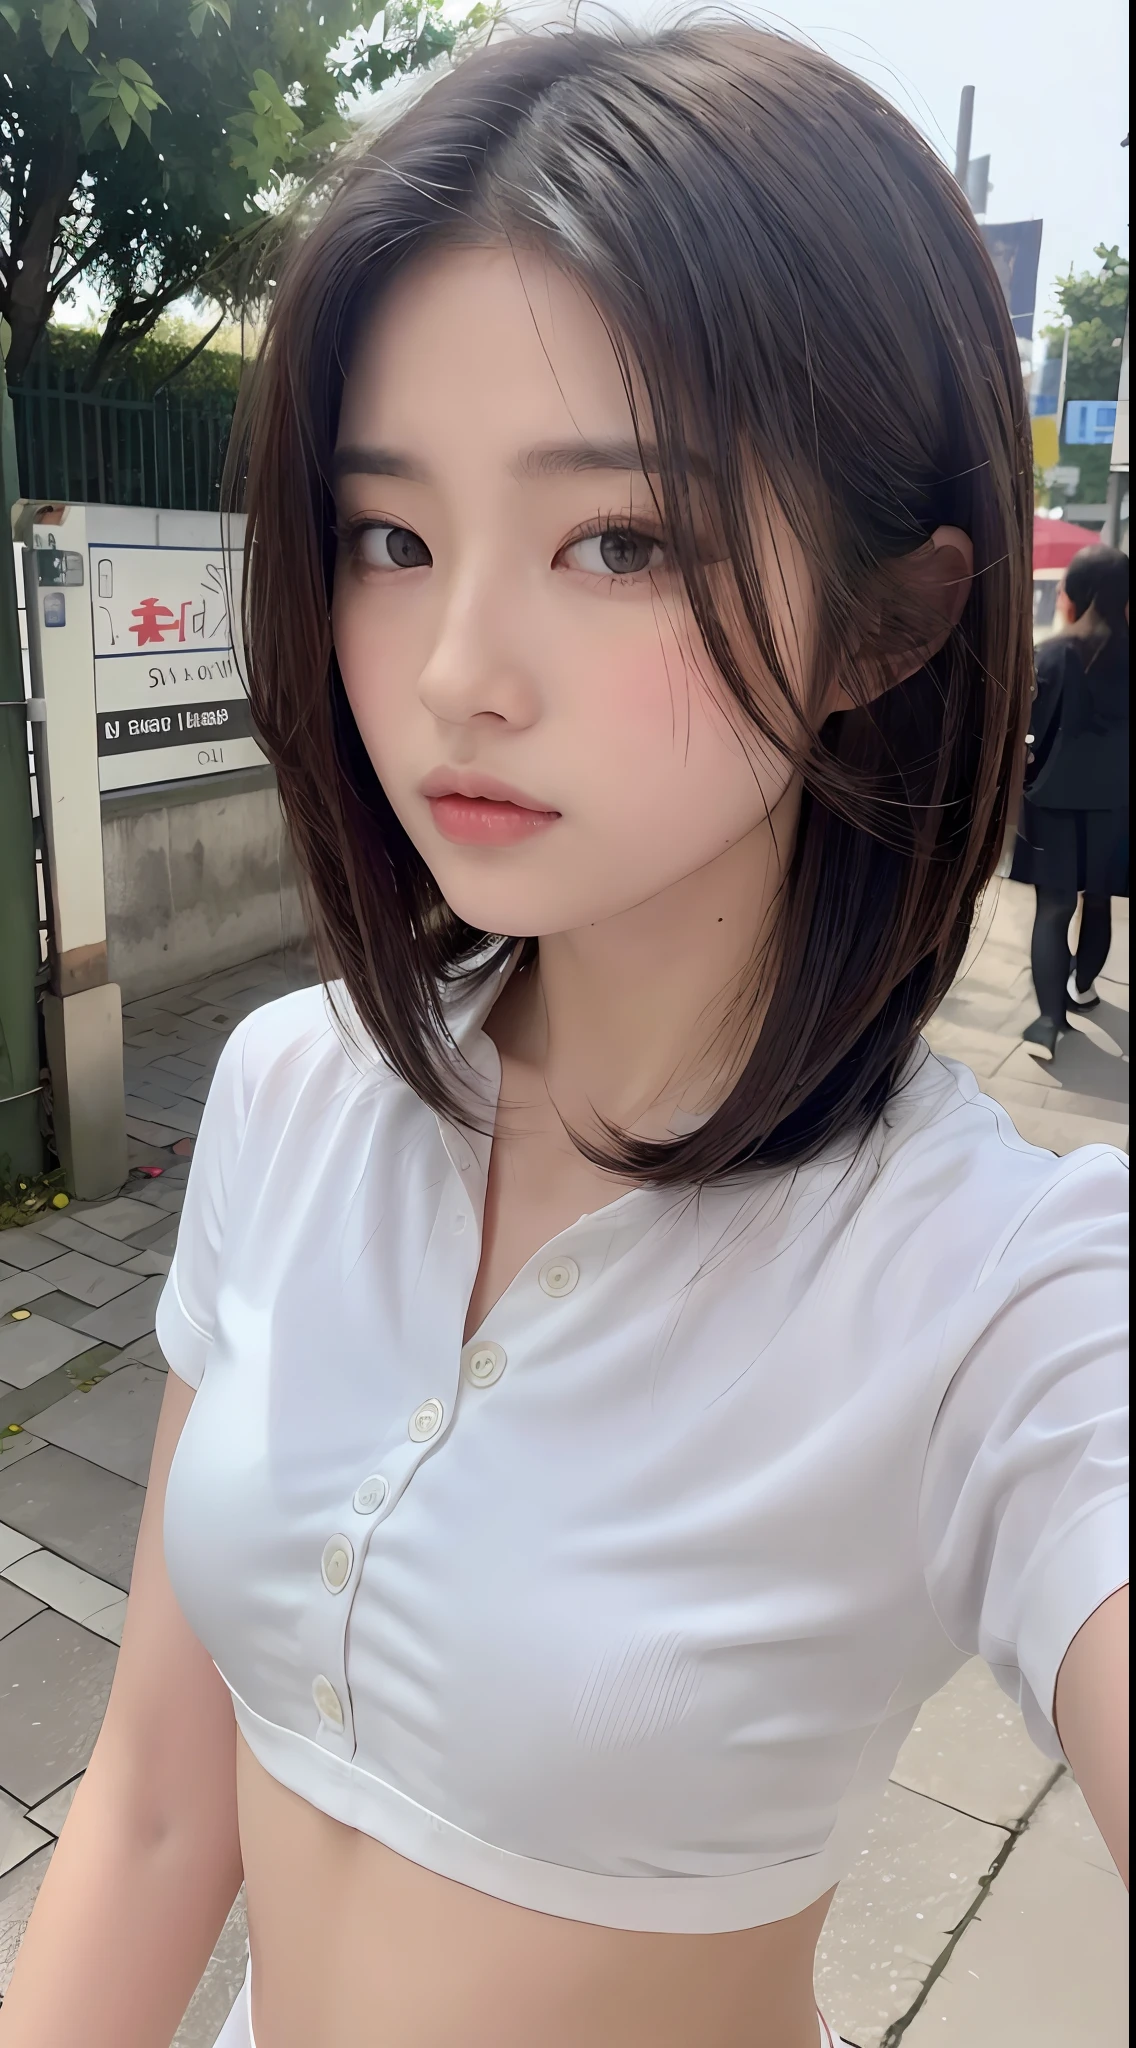 ((Best Quality, 8K, Masterpiece: 1.3)), Sharp: 1.2, Perfect Body Beauty: 1.4, Slim Abs: 1.2, ((Layered Hairstyle, :1.2)), (White Button Short Sleeve Shirt: 1.1), (Street: 1.2), Wet: 1.5, Highly detailed face and skin texture, Fine eyes, double eyelids, looking at the camera